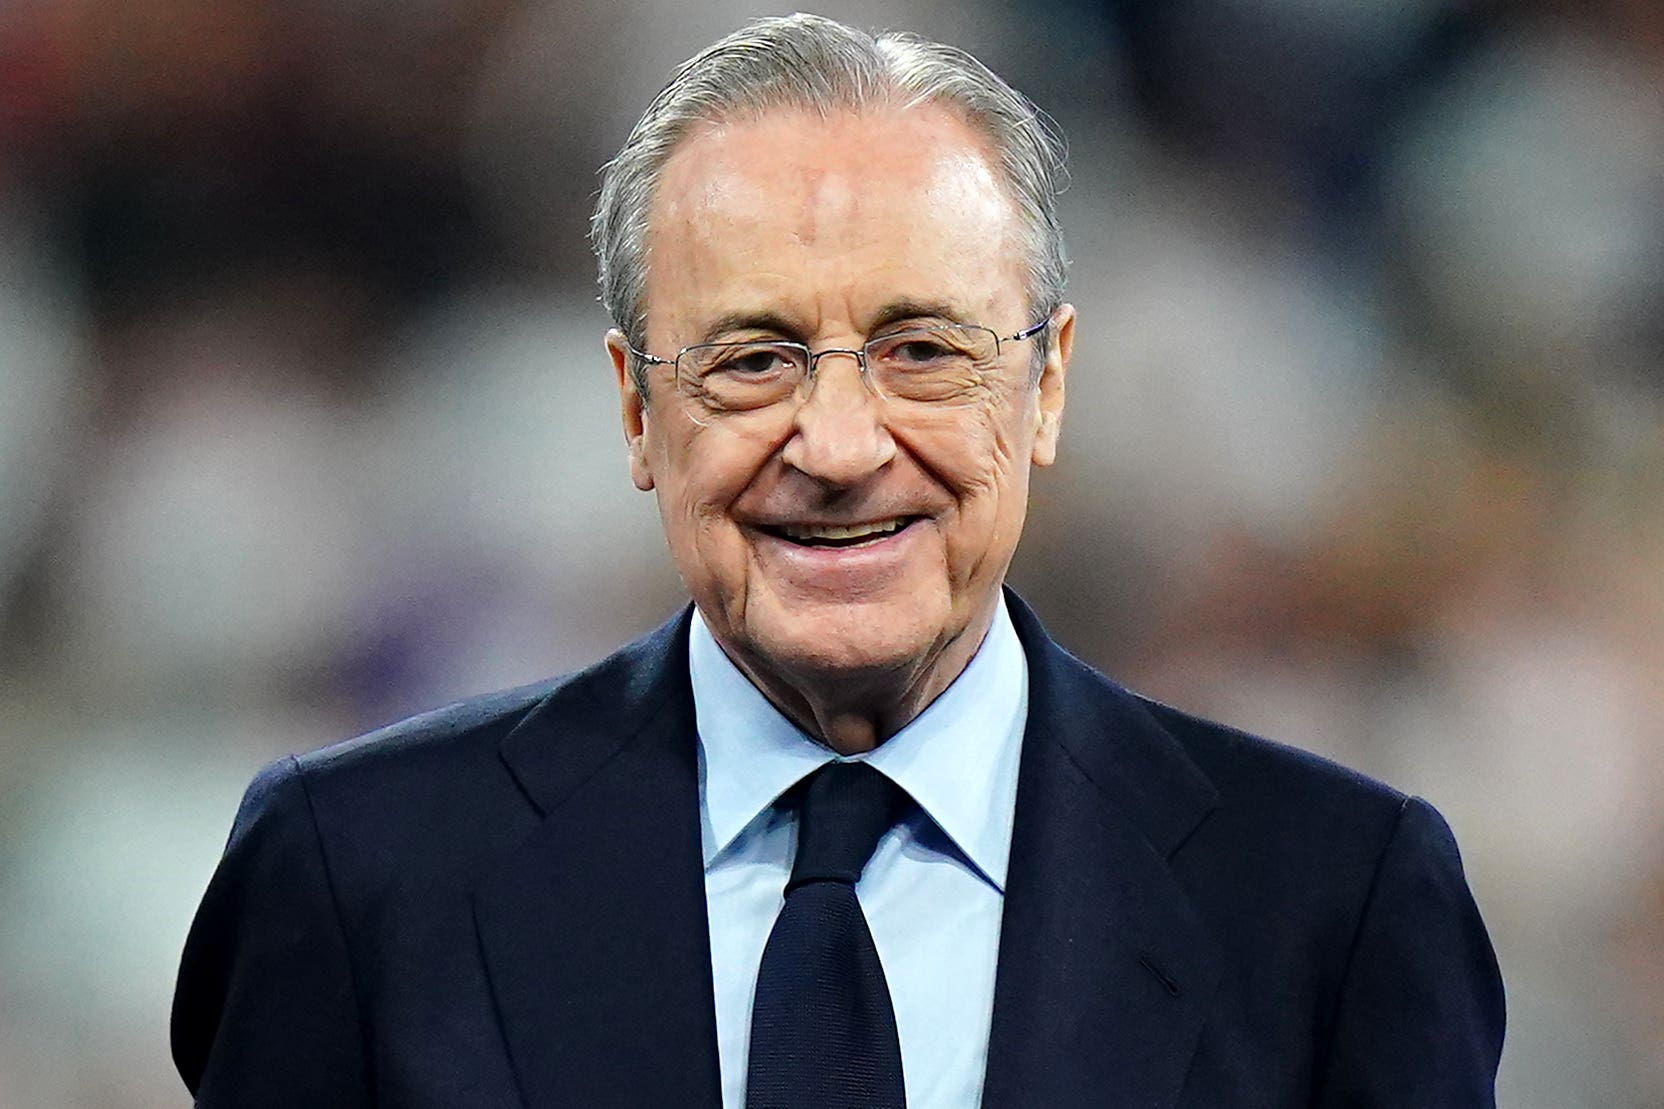 Real Madrid president Florentino Perez reiterated his support for the European Super League